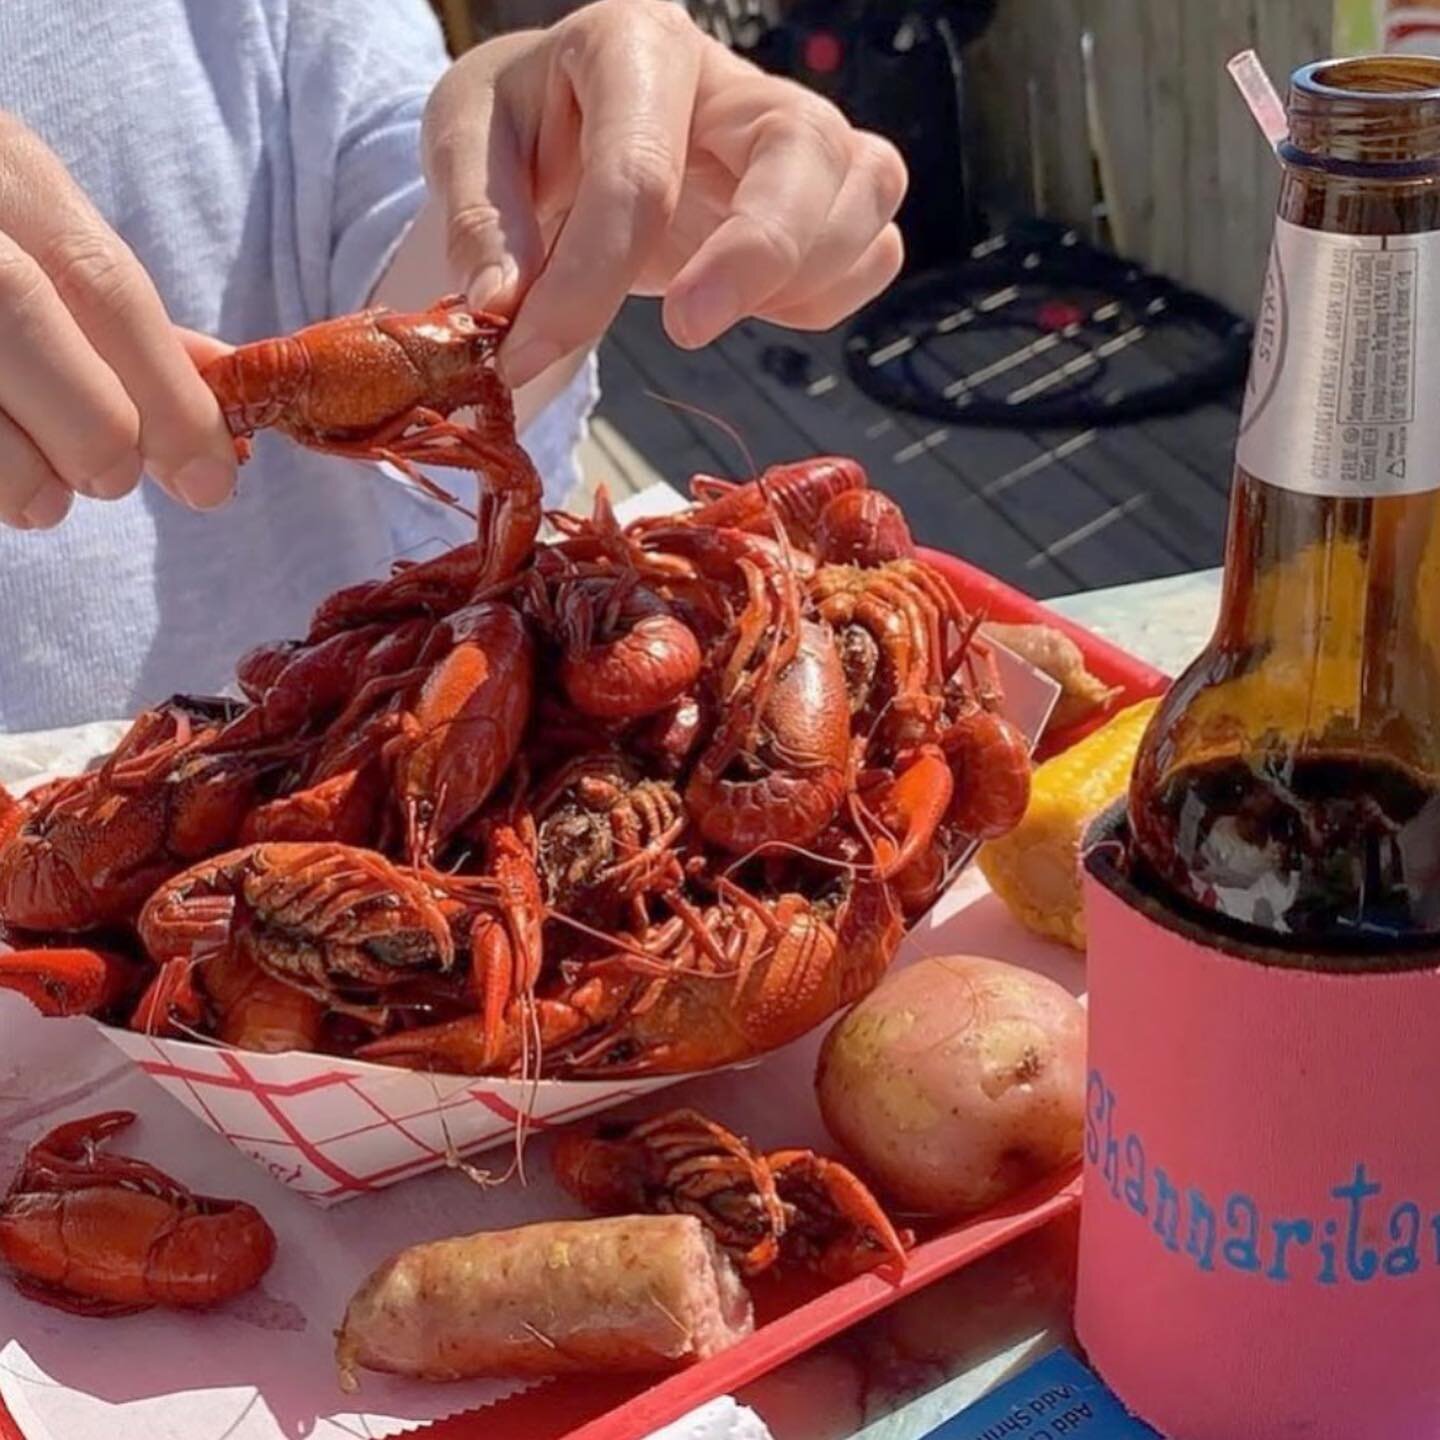 Crawfish Season! 🦐
.
Grab your mud bugs while you can. Our favorite places:

- @boathouseoysterbar on Saturday &amp; Sunday at 11:30am until sell out
- Vibe Nightclub with Chef Tommy in FWB on Sunday&rsquo;s

Tag us in your Crawfish posts and storie